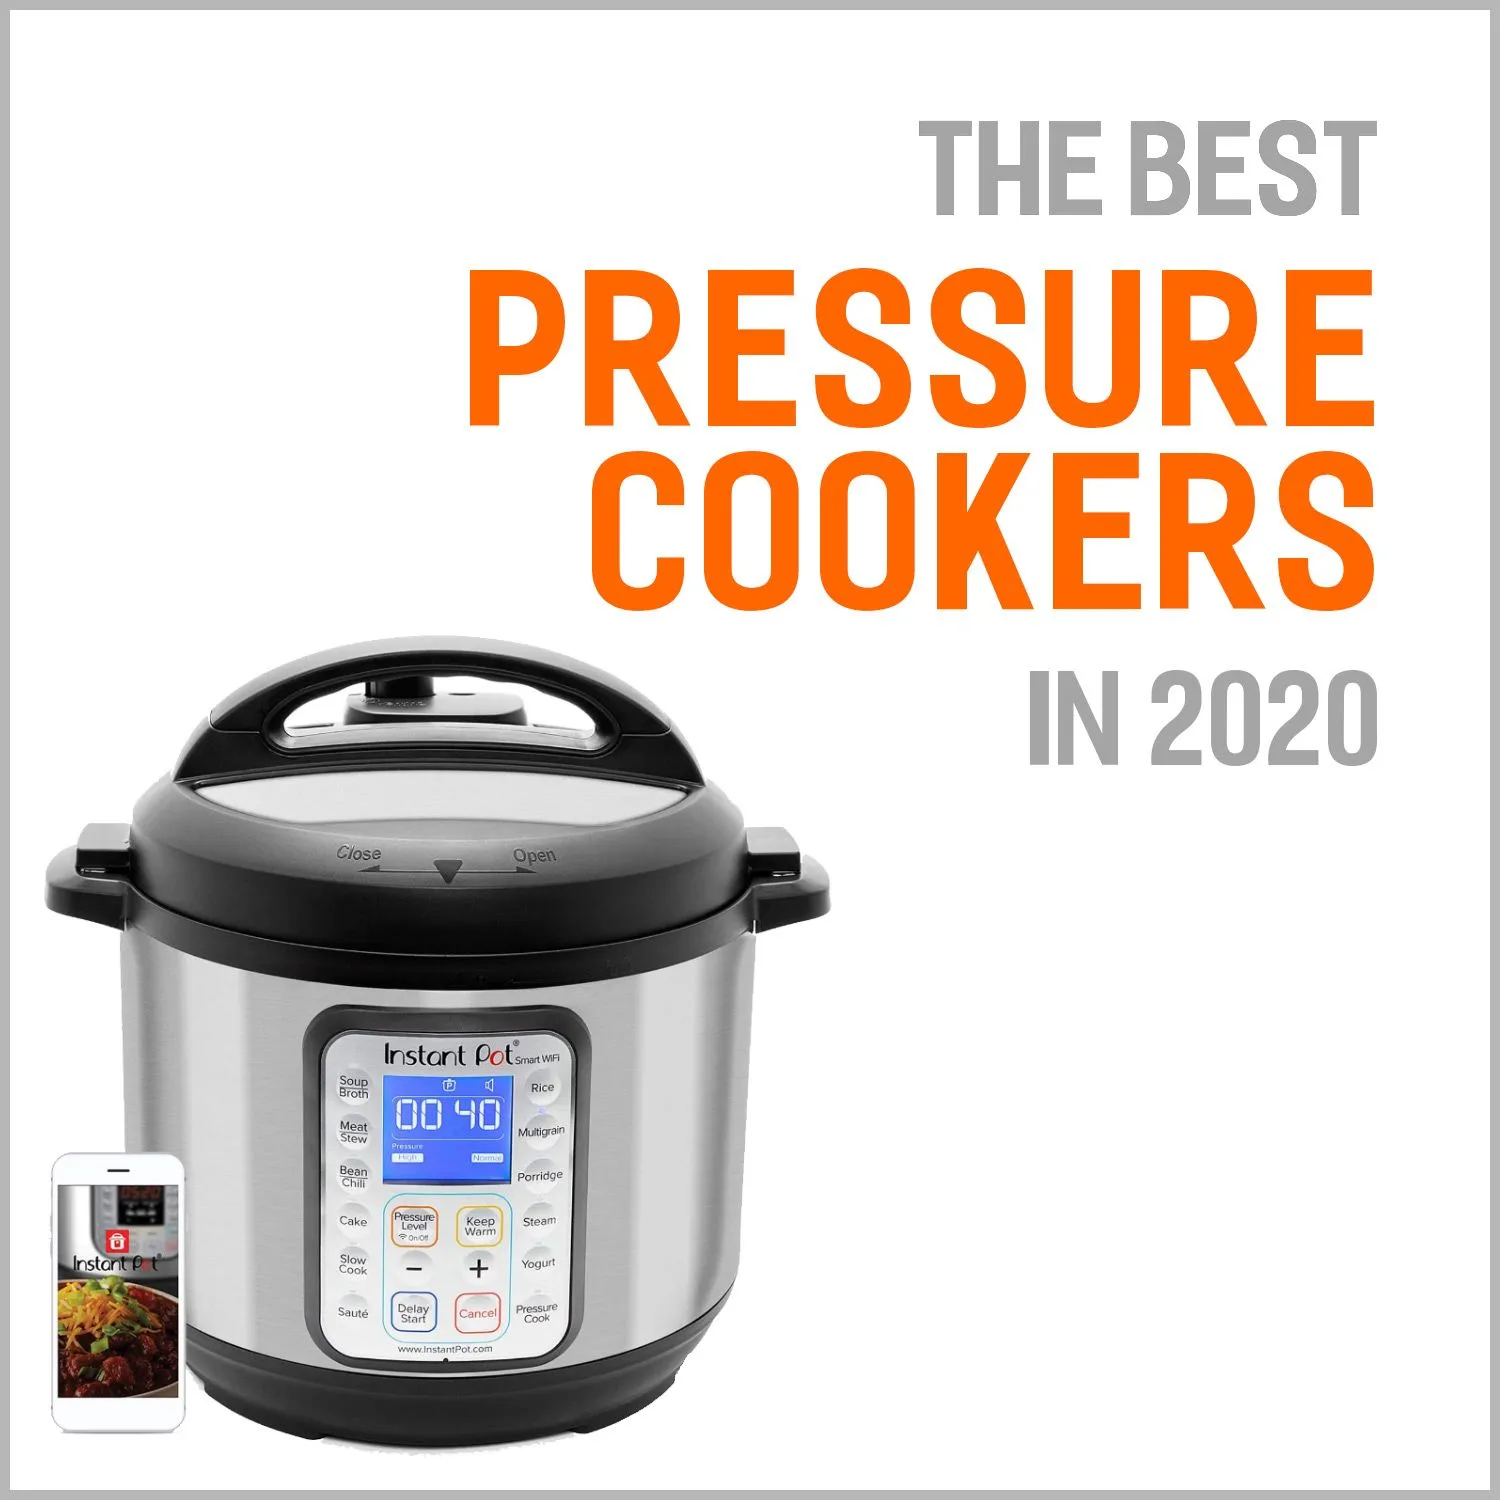 The 7 Best Pressure Cookers In 2020 Buyer S Guide Reviews,Diy Projects For Home